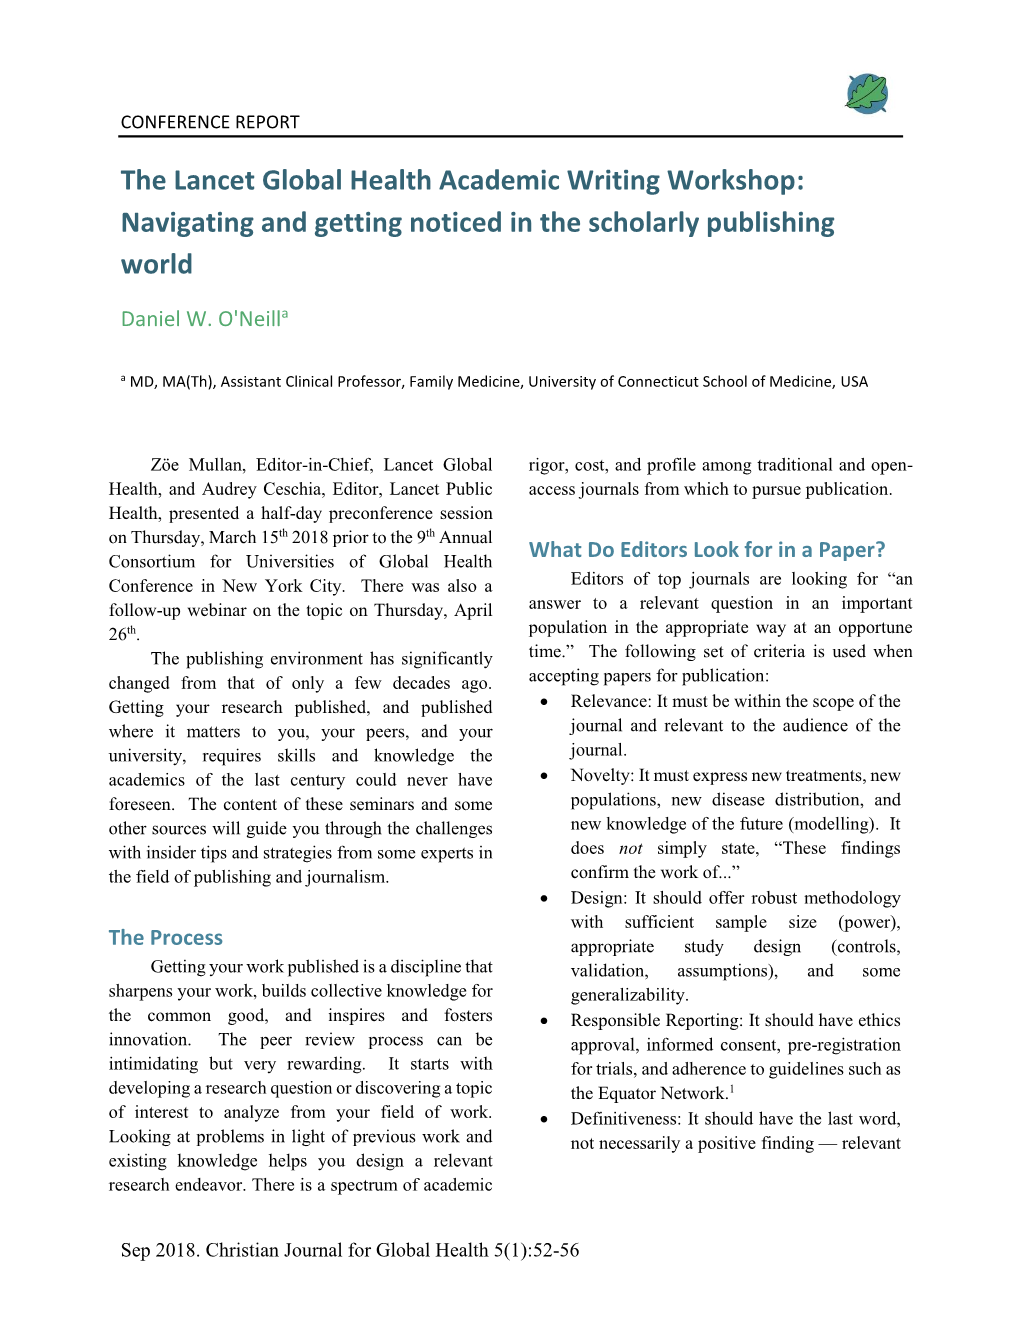 The Lancet Global Health Academic Writing Workshop: Navigating and Getting Noticed in the Scholarly Publishing World